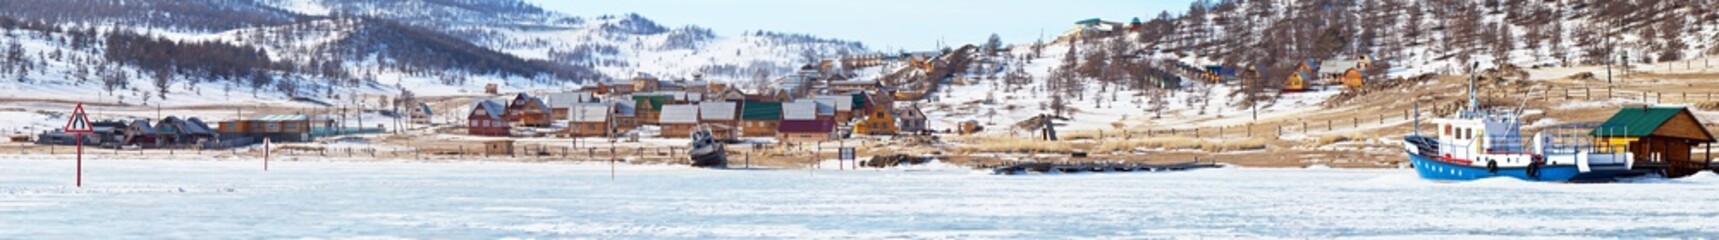 Winter Baikal Lake. A panoramic view of the coast of the Kurkut Bay - a popular tourist destination with wooden houses, a ship on a frozen pier and an exit to the ice road to Olkhon Island